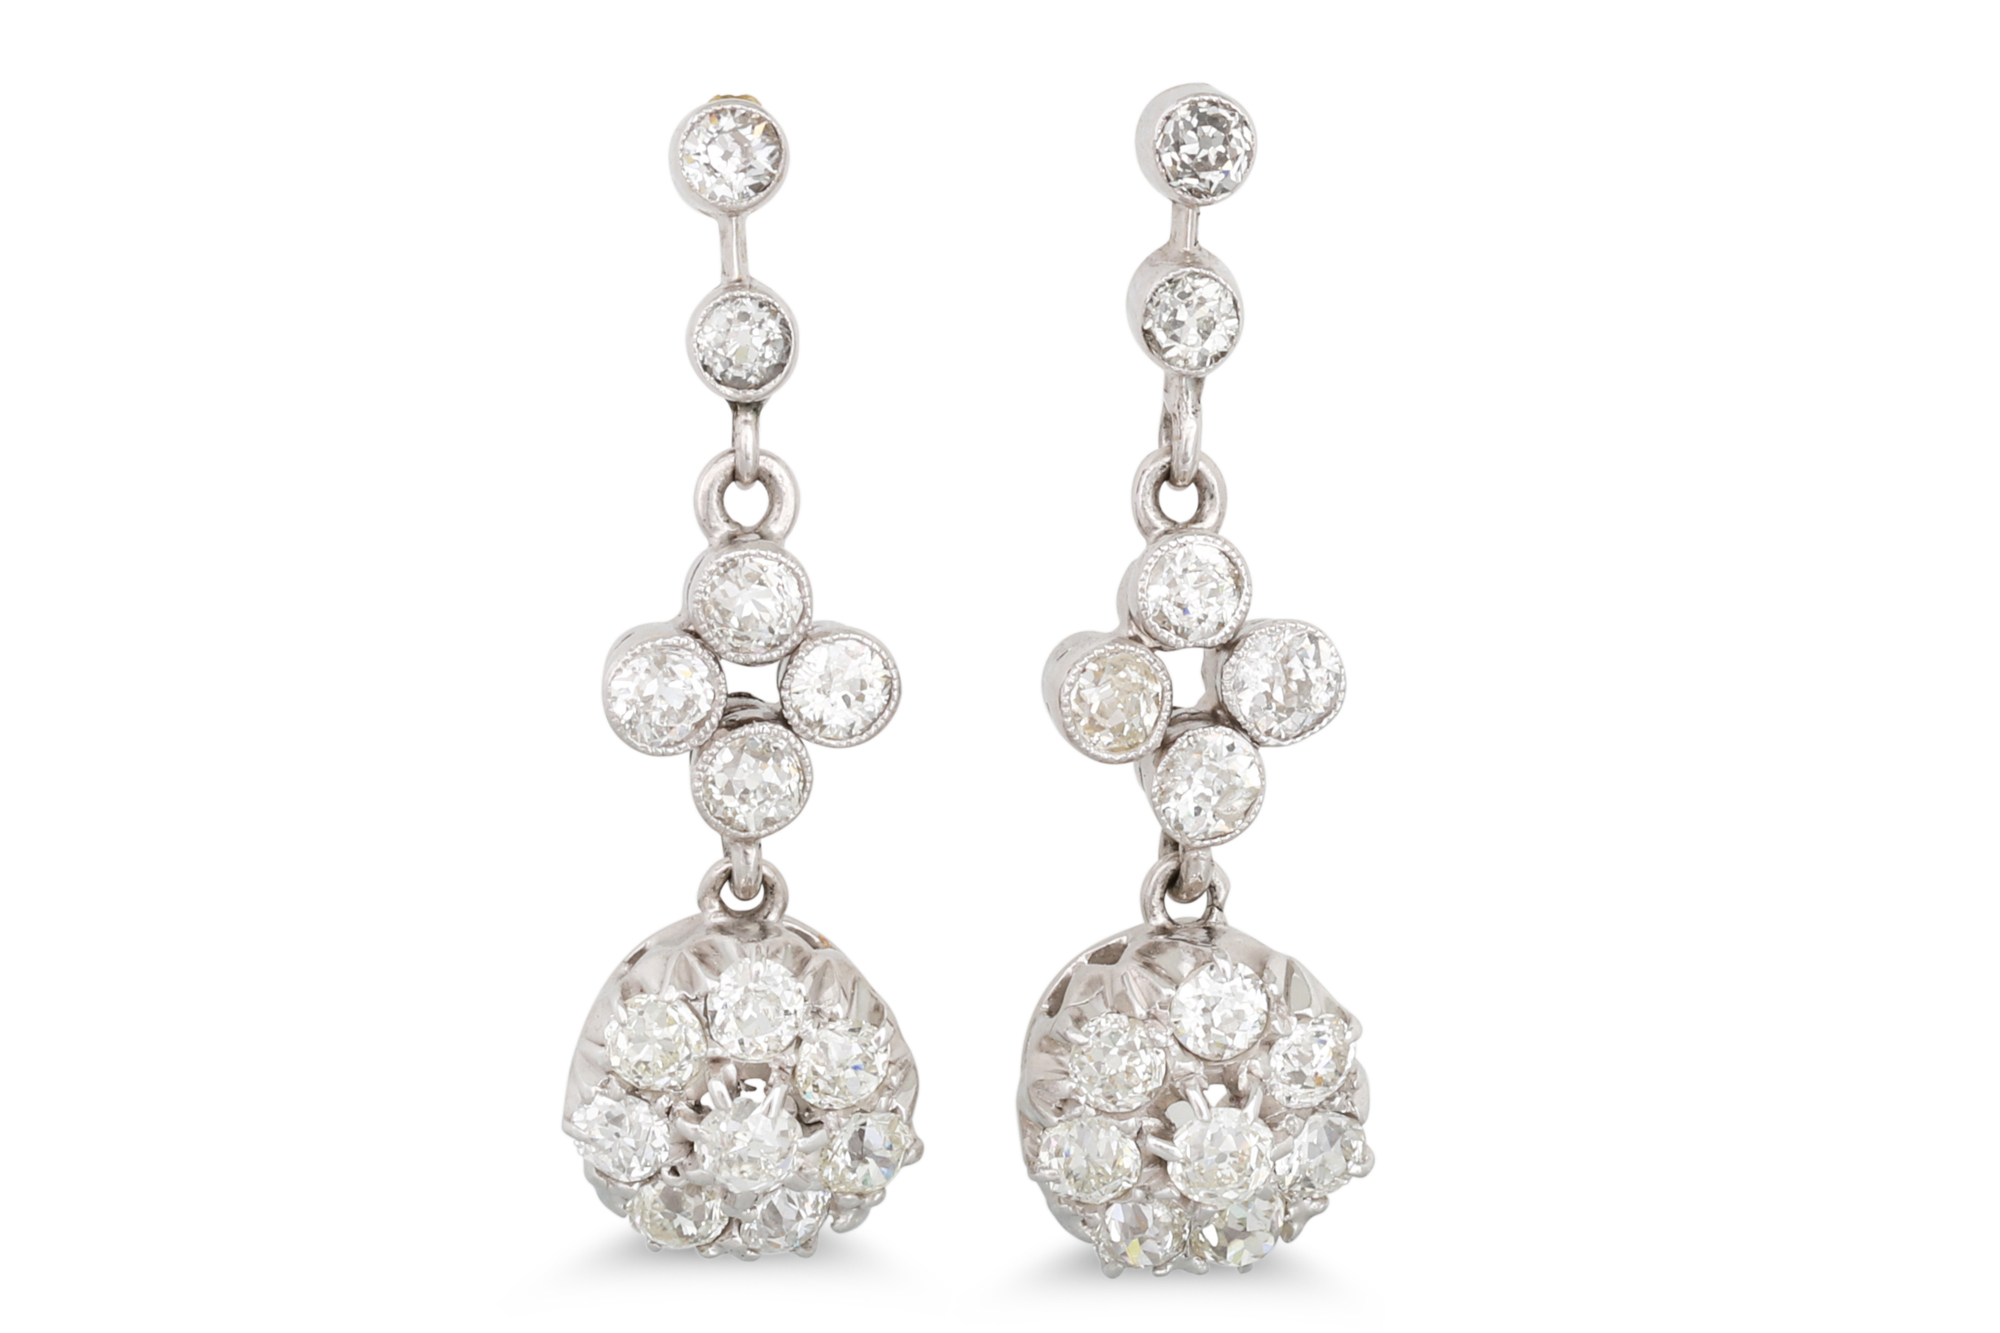 A PAIR OF DIAMOND DROP CLUSTER EARRINGS, the old cut diamonds mounted in white gold. Estimated: